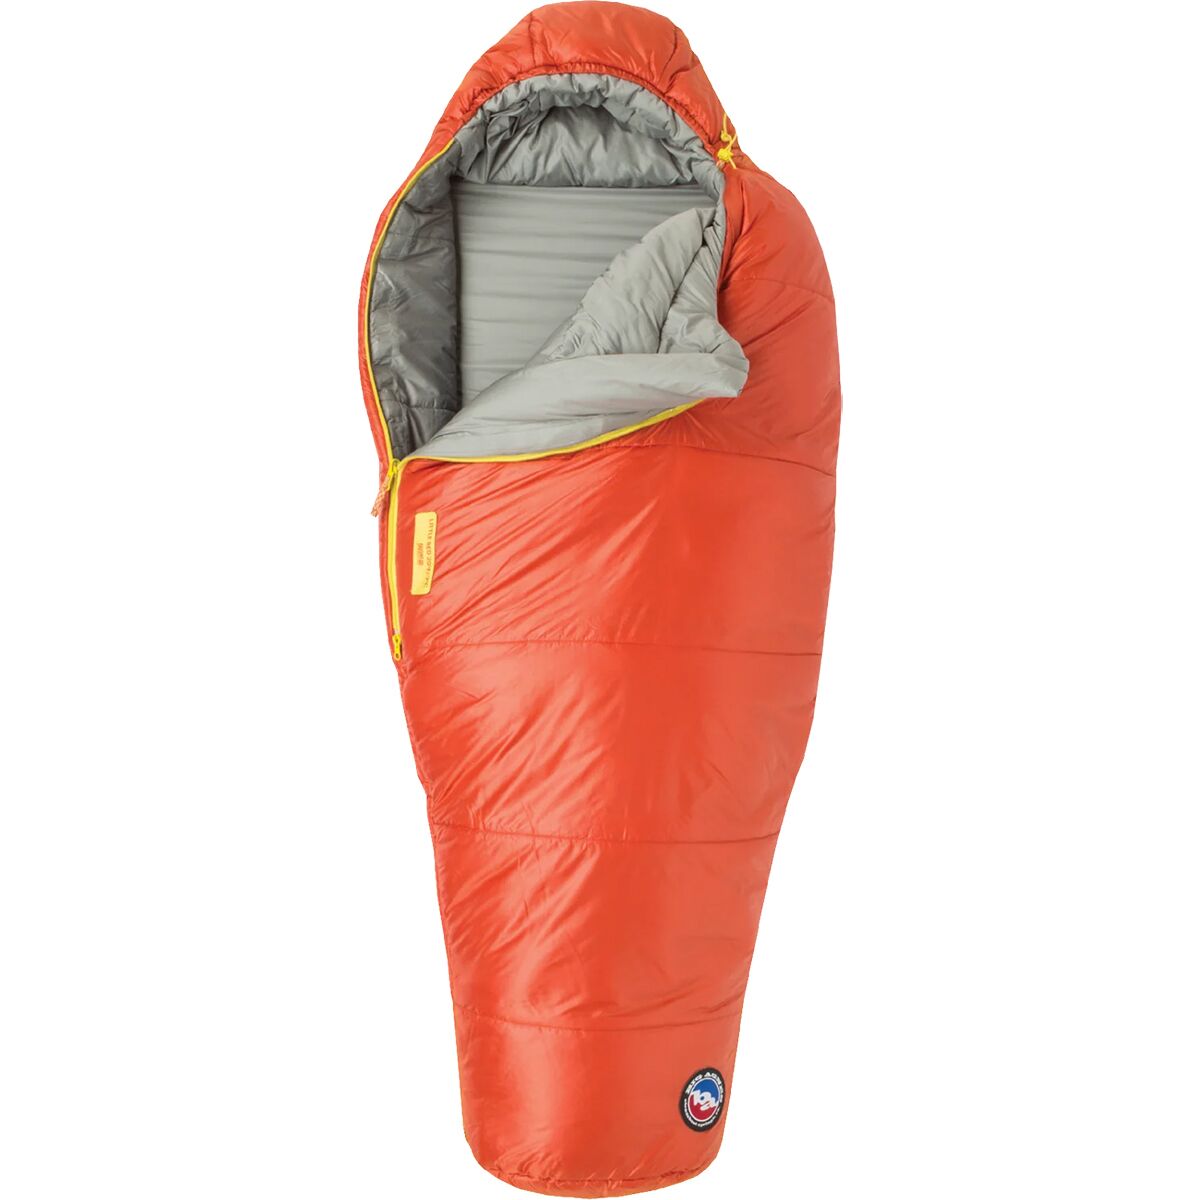 Big Agnes Little Red Sleeping Bag: 15F Synthetic - Kids'